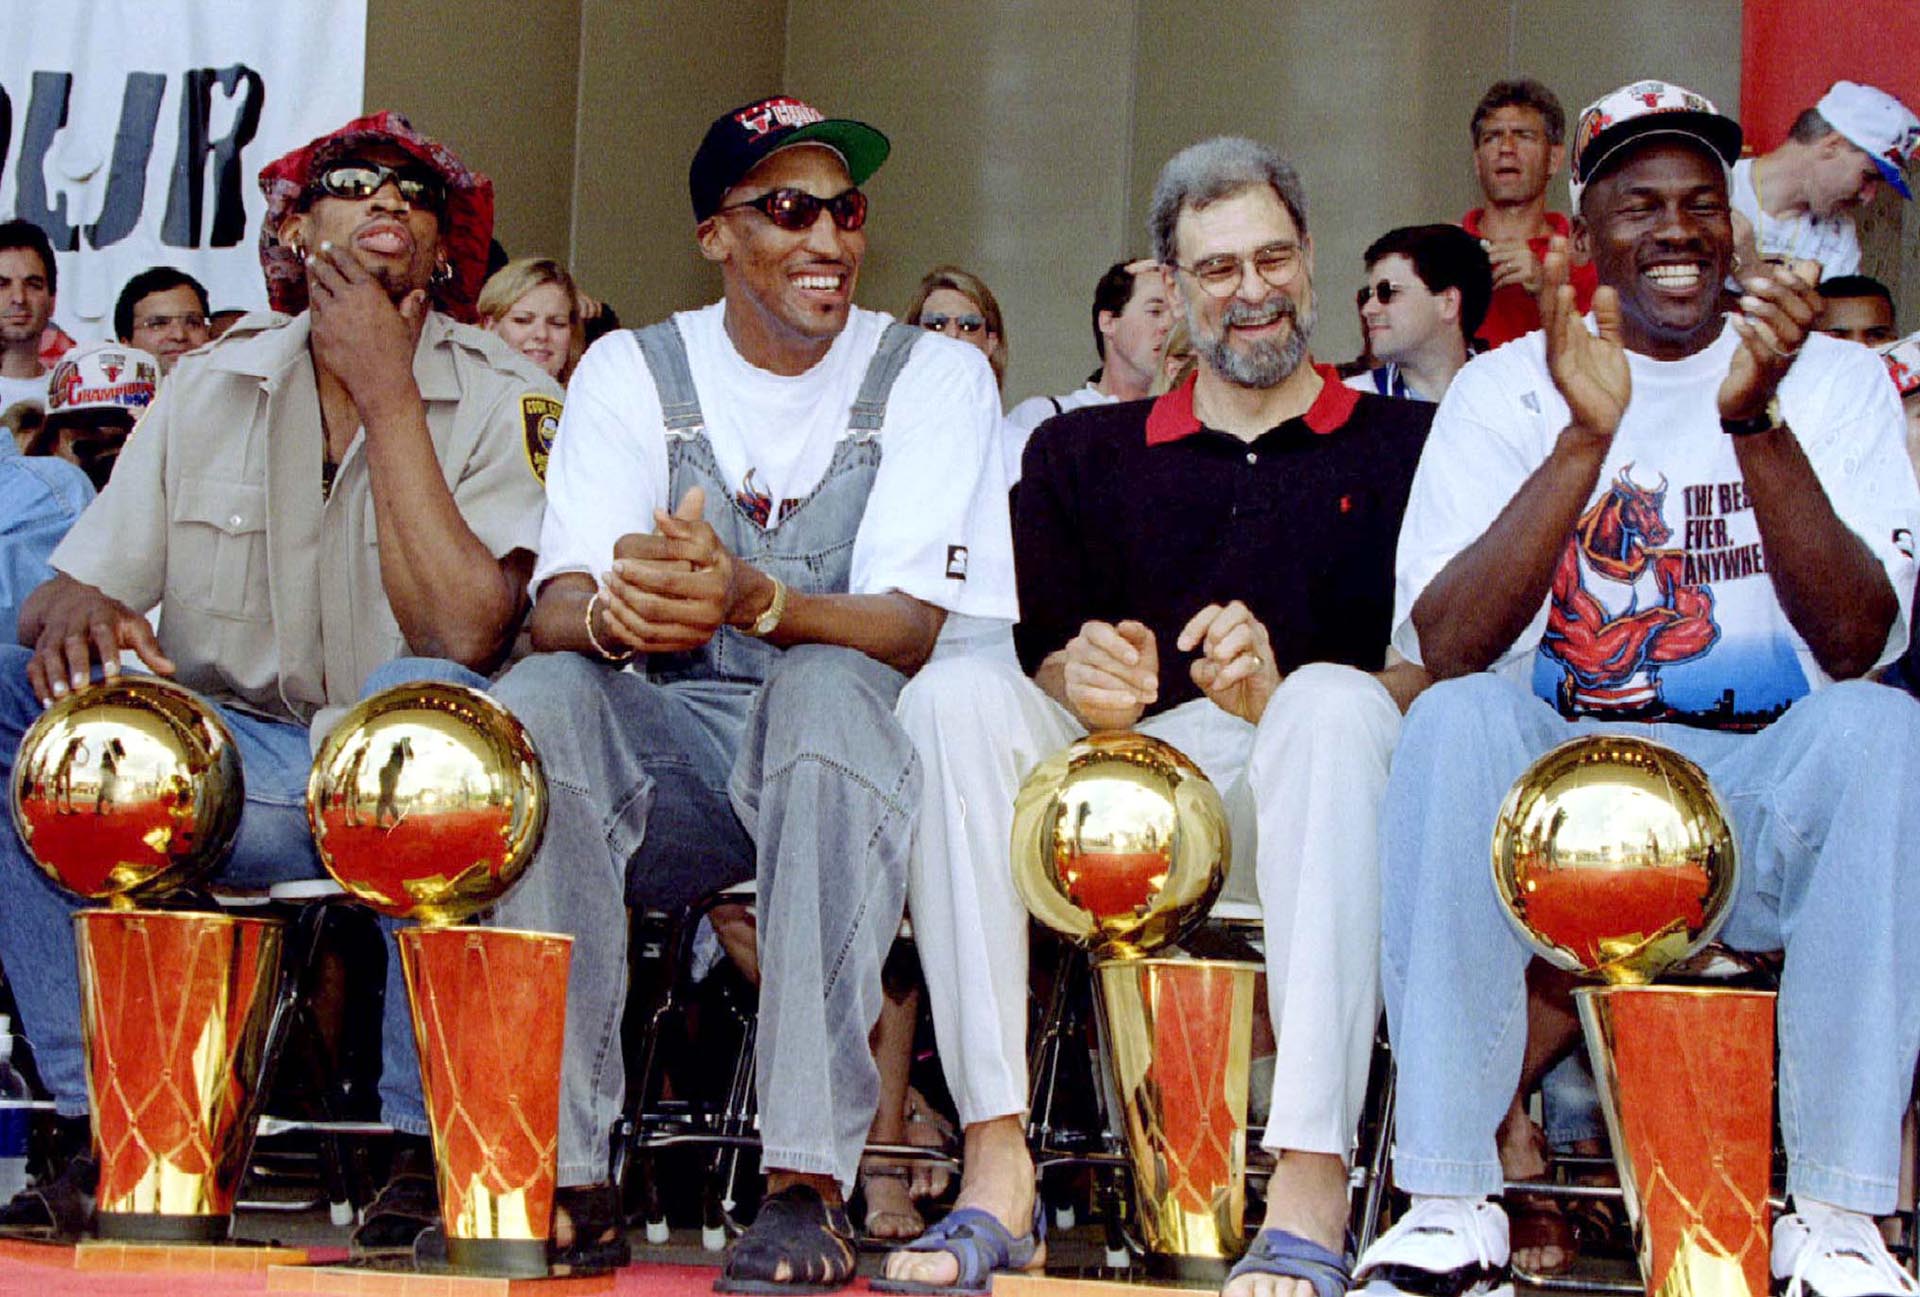 With their four championship trophies at their feet, Chicago Bulls Dennis Rodman (left), Scottie Pippen (left, center), coach Phil Jackson and Michael Jordan (right) laugh at a teammate's comments at a team rally in Chicago.